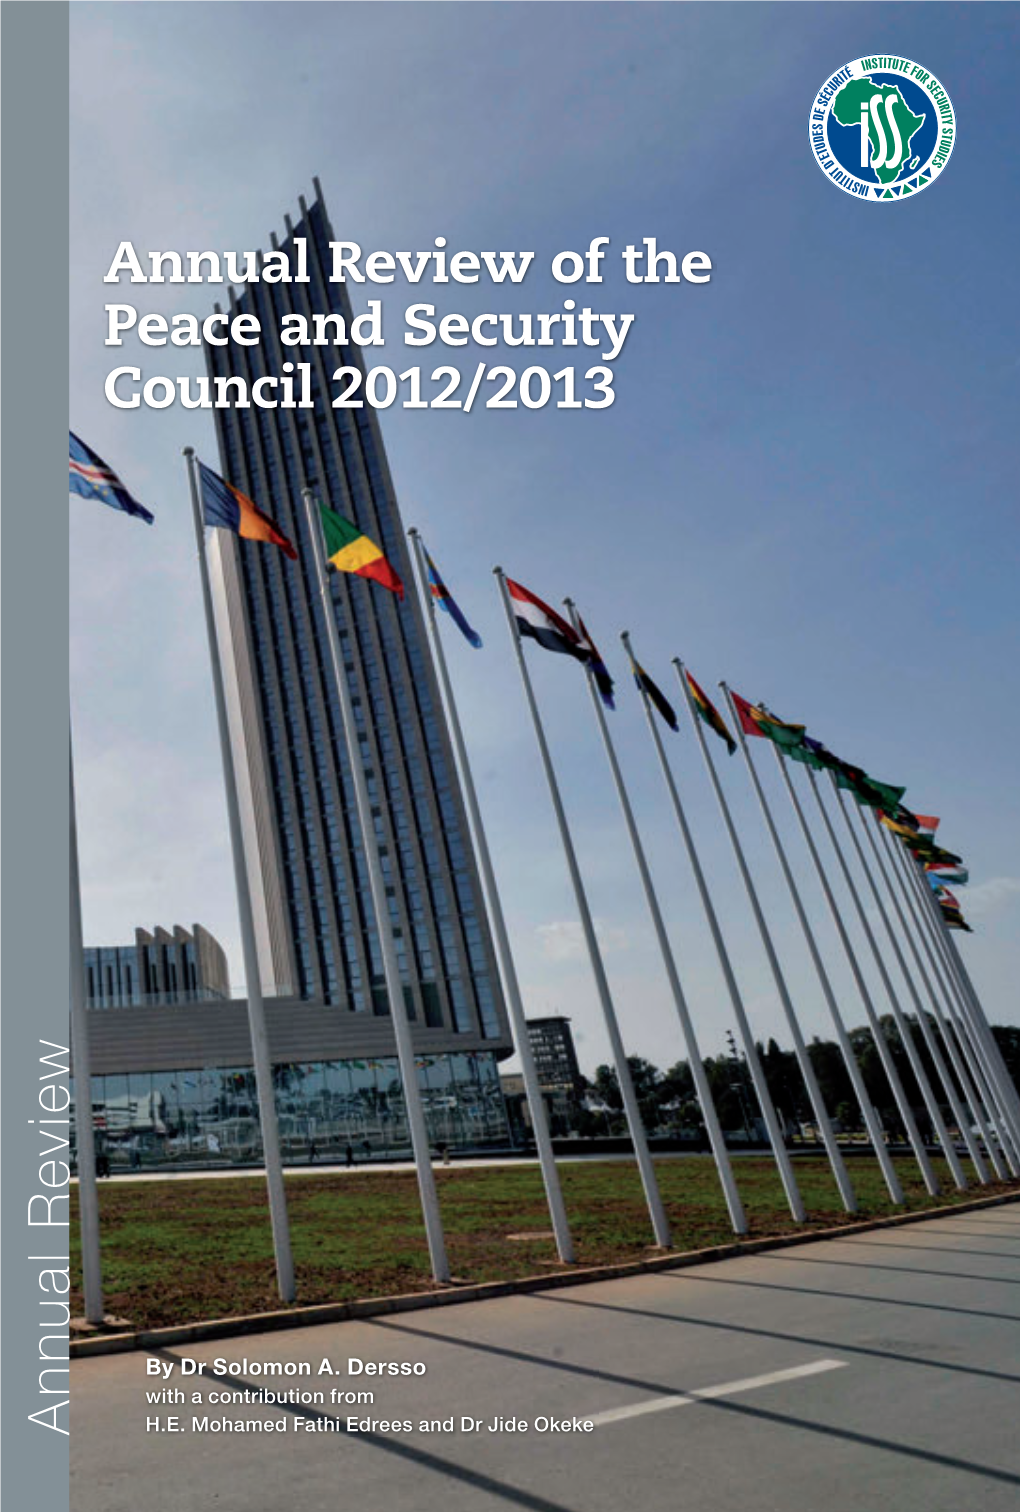 An N U a L R E Vie W Annual Review of the Peace and Security Council